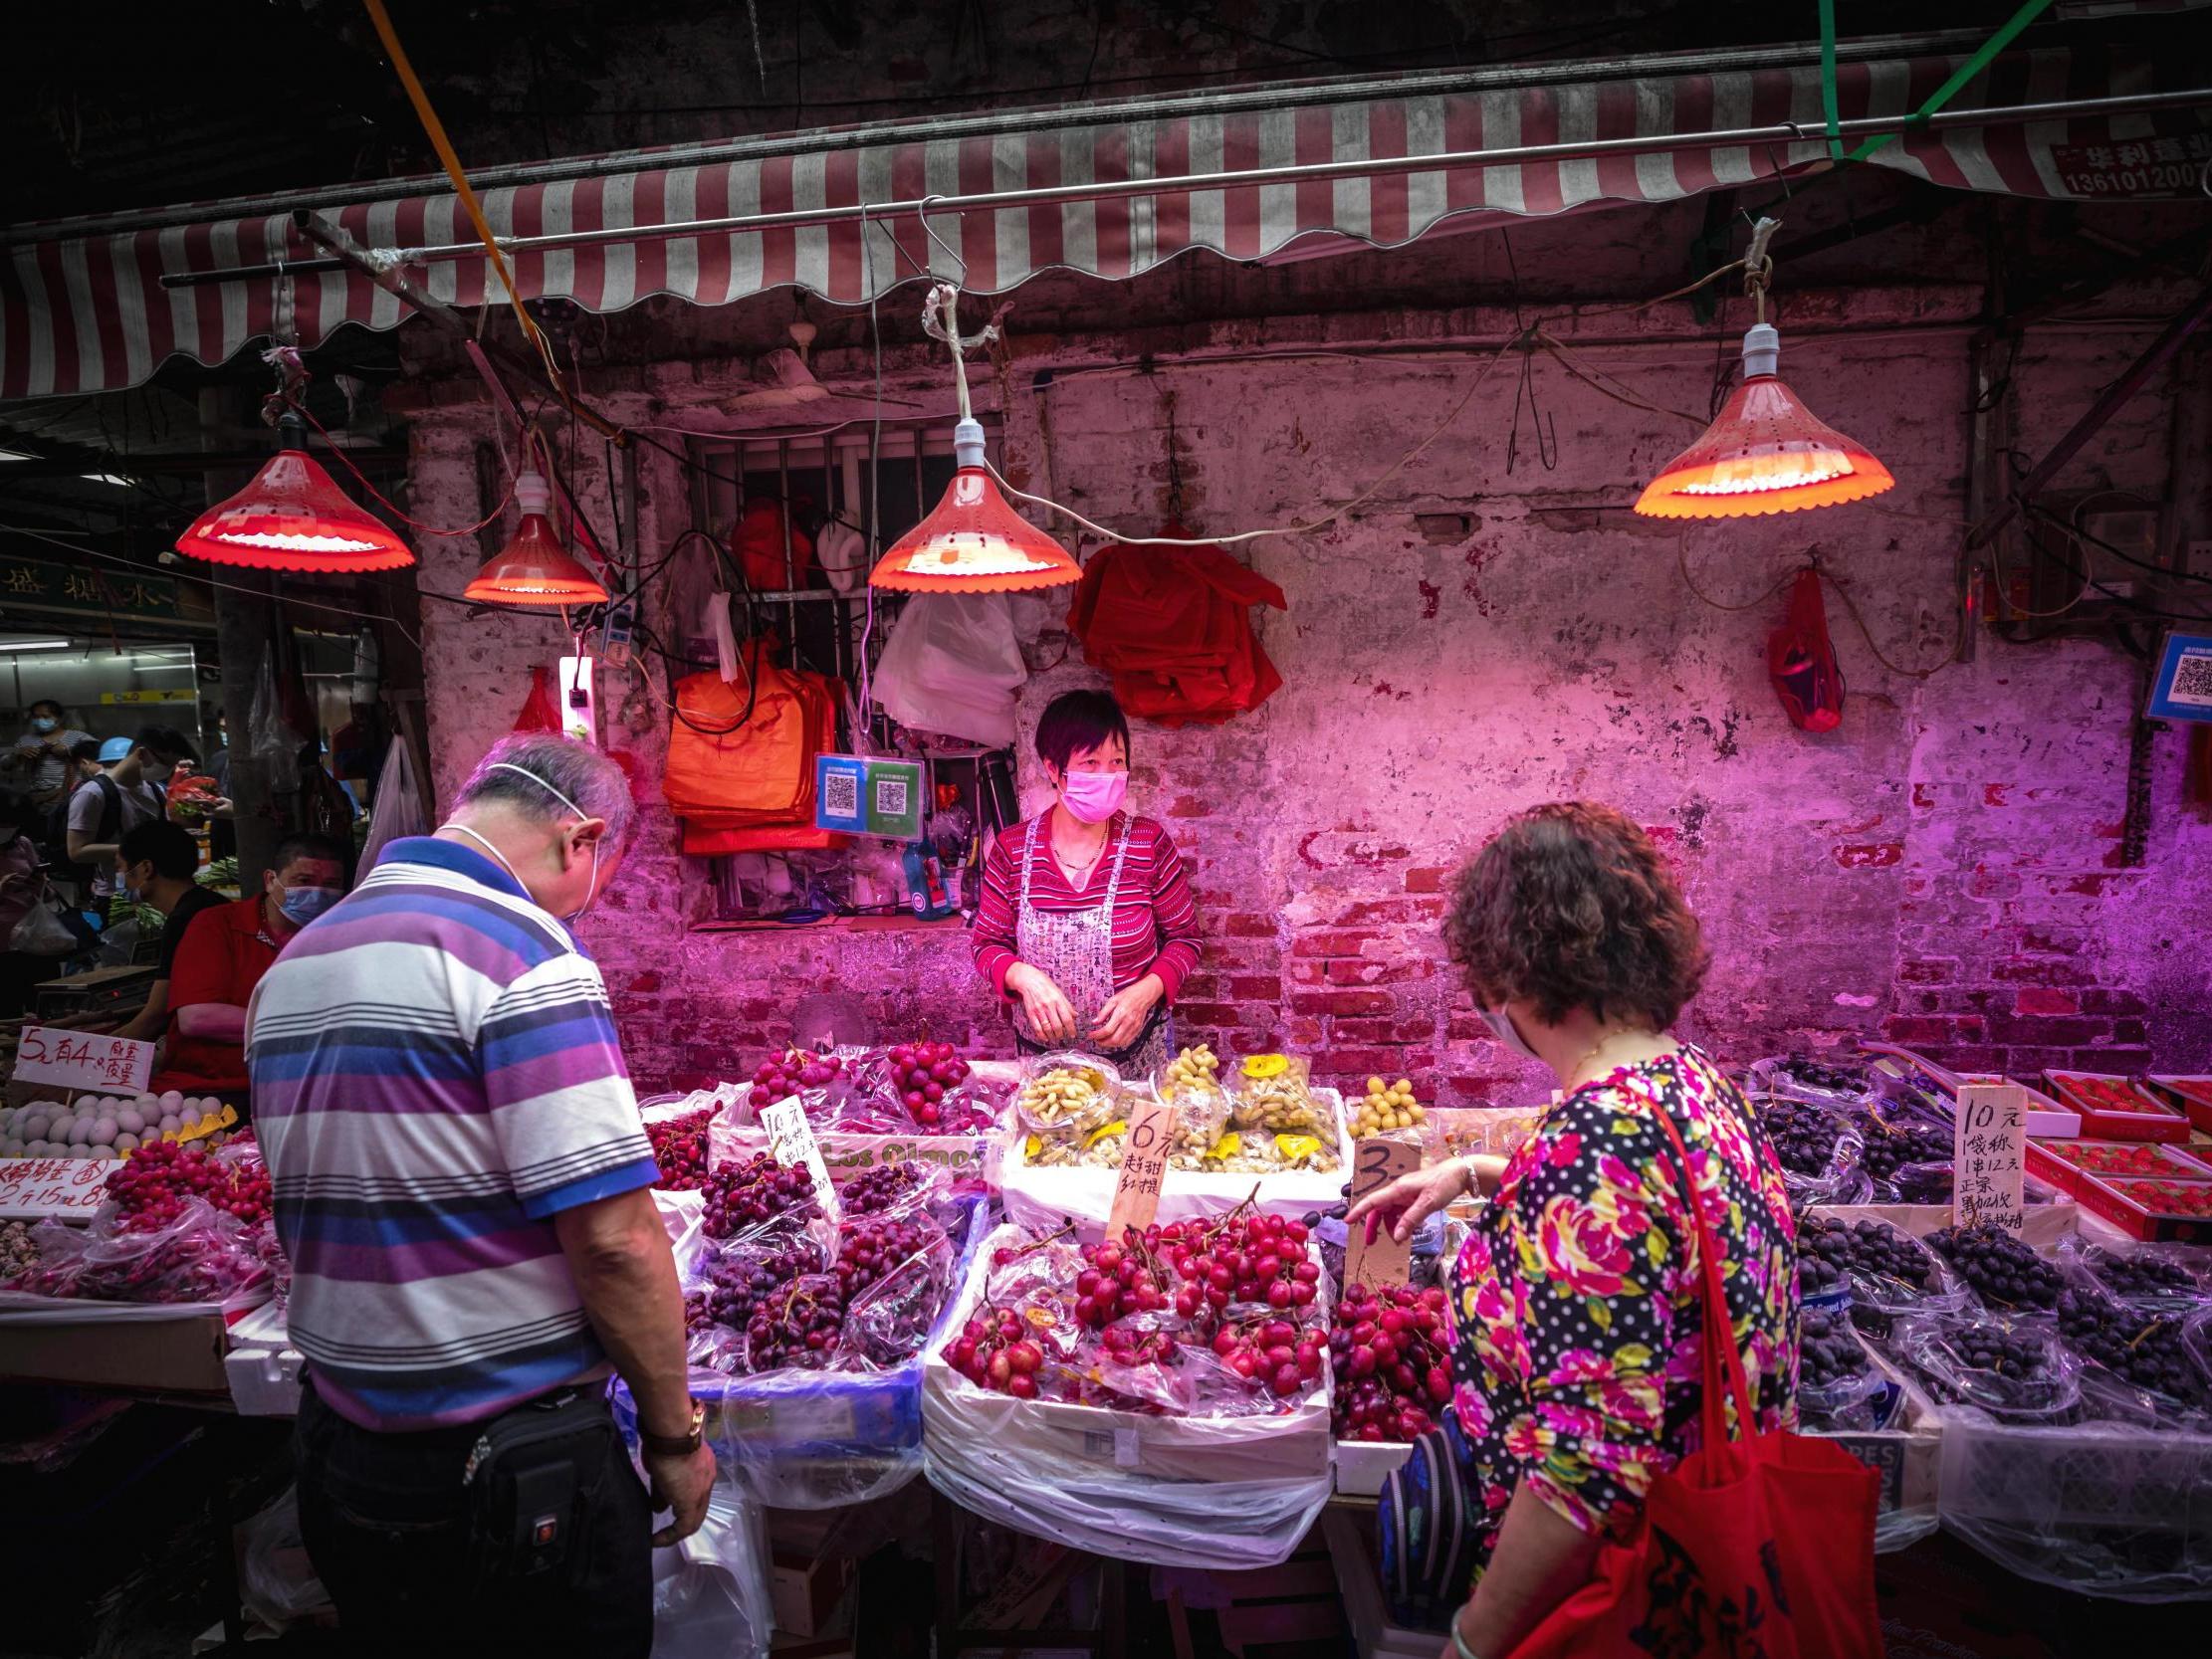 People buy food at a wet market in Guangzhou, China